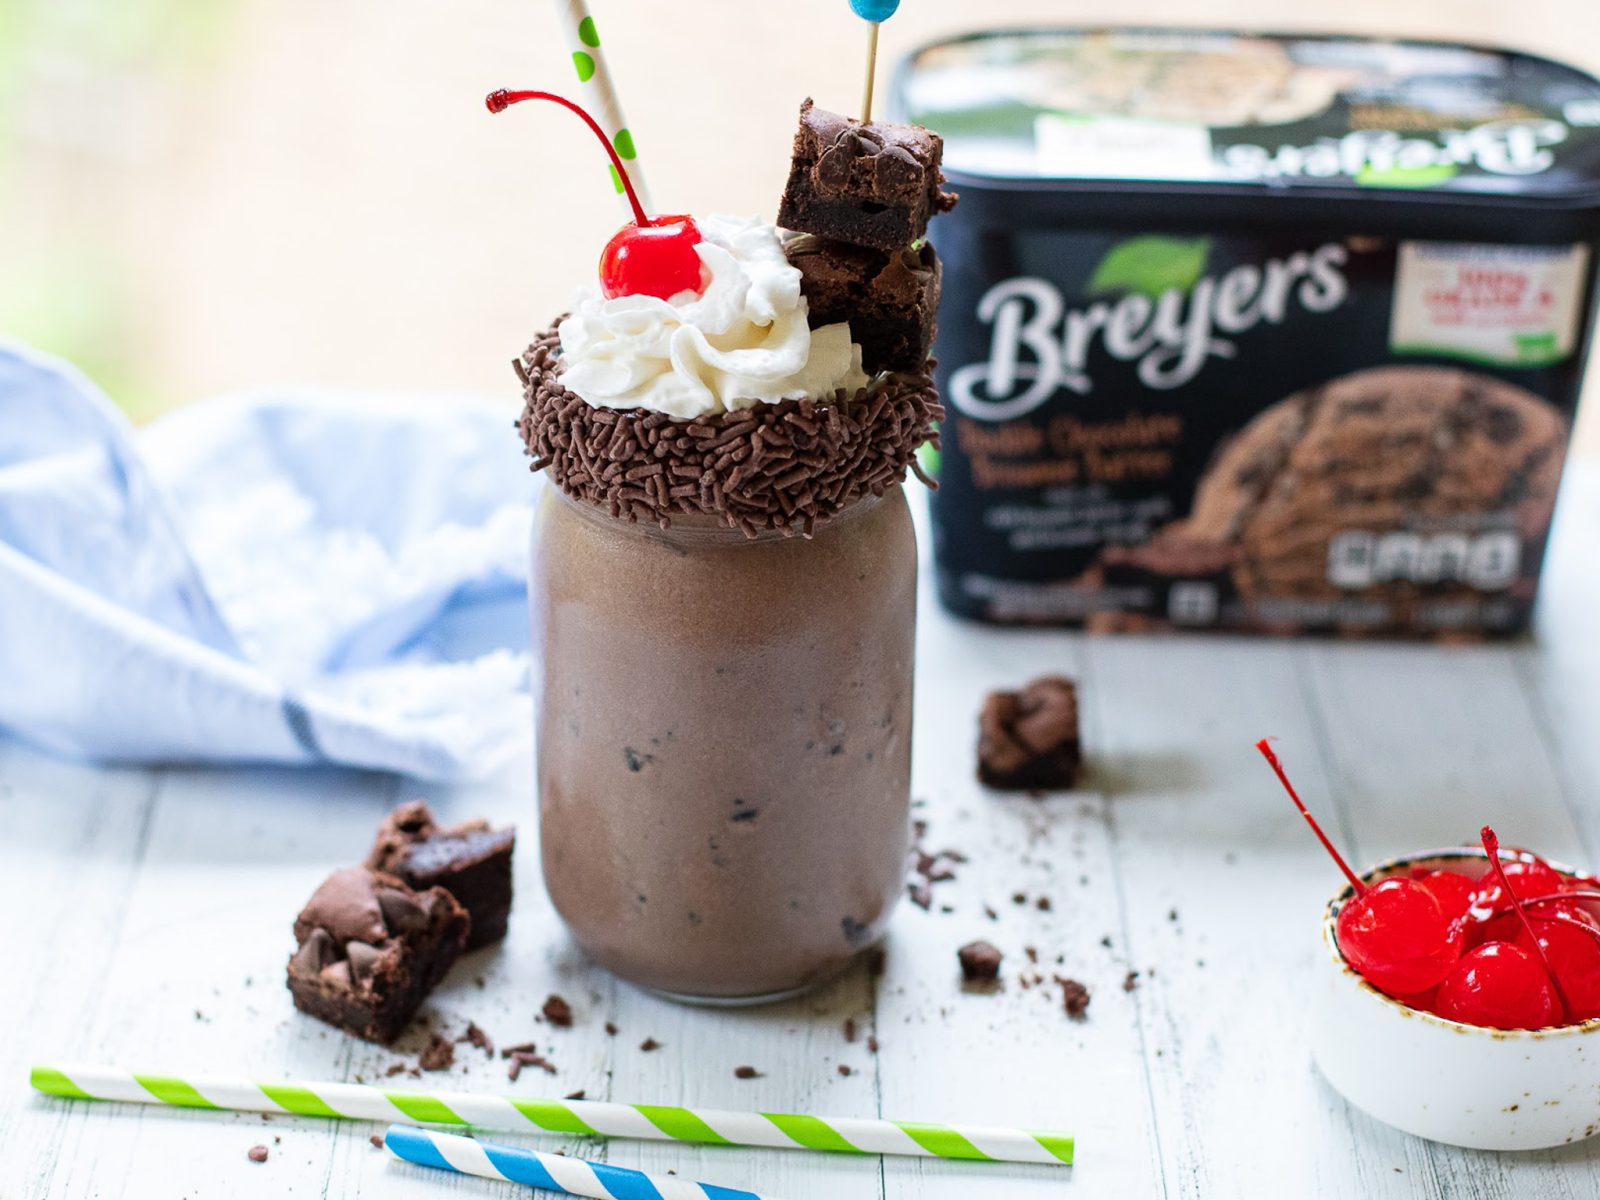 Chocolate Brownie Batter Shakes Are The Ultimate After School Treat – Look For Savings On Breyers® At Publix